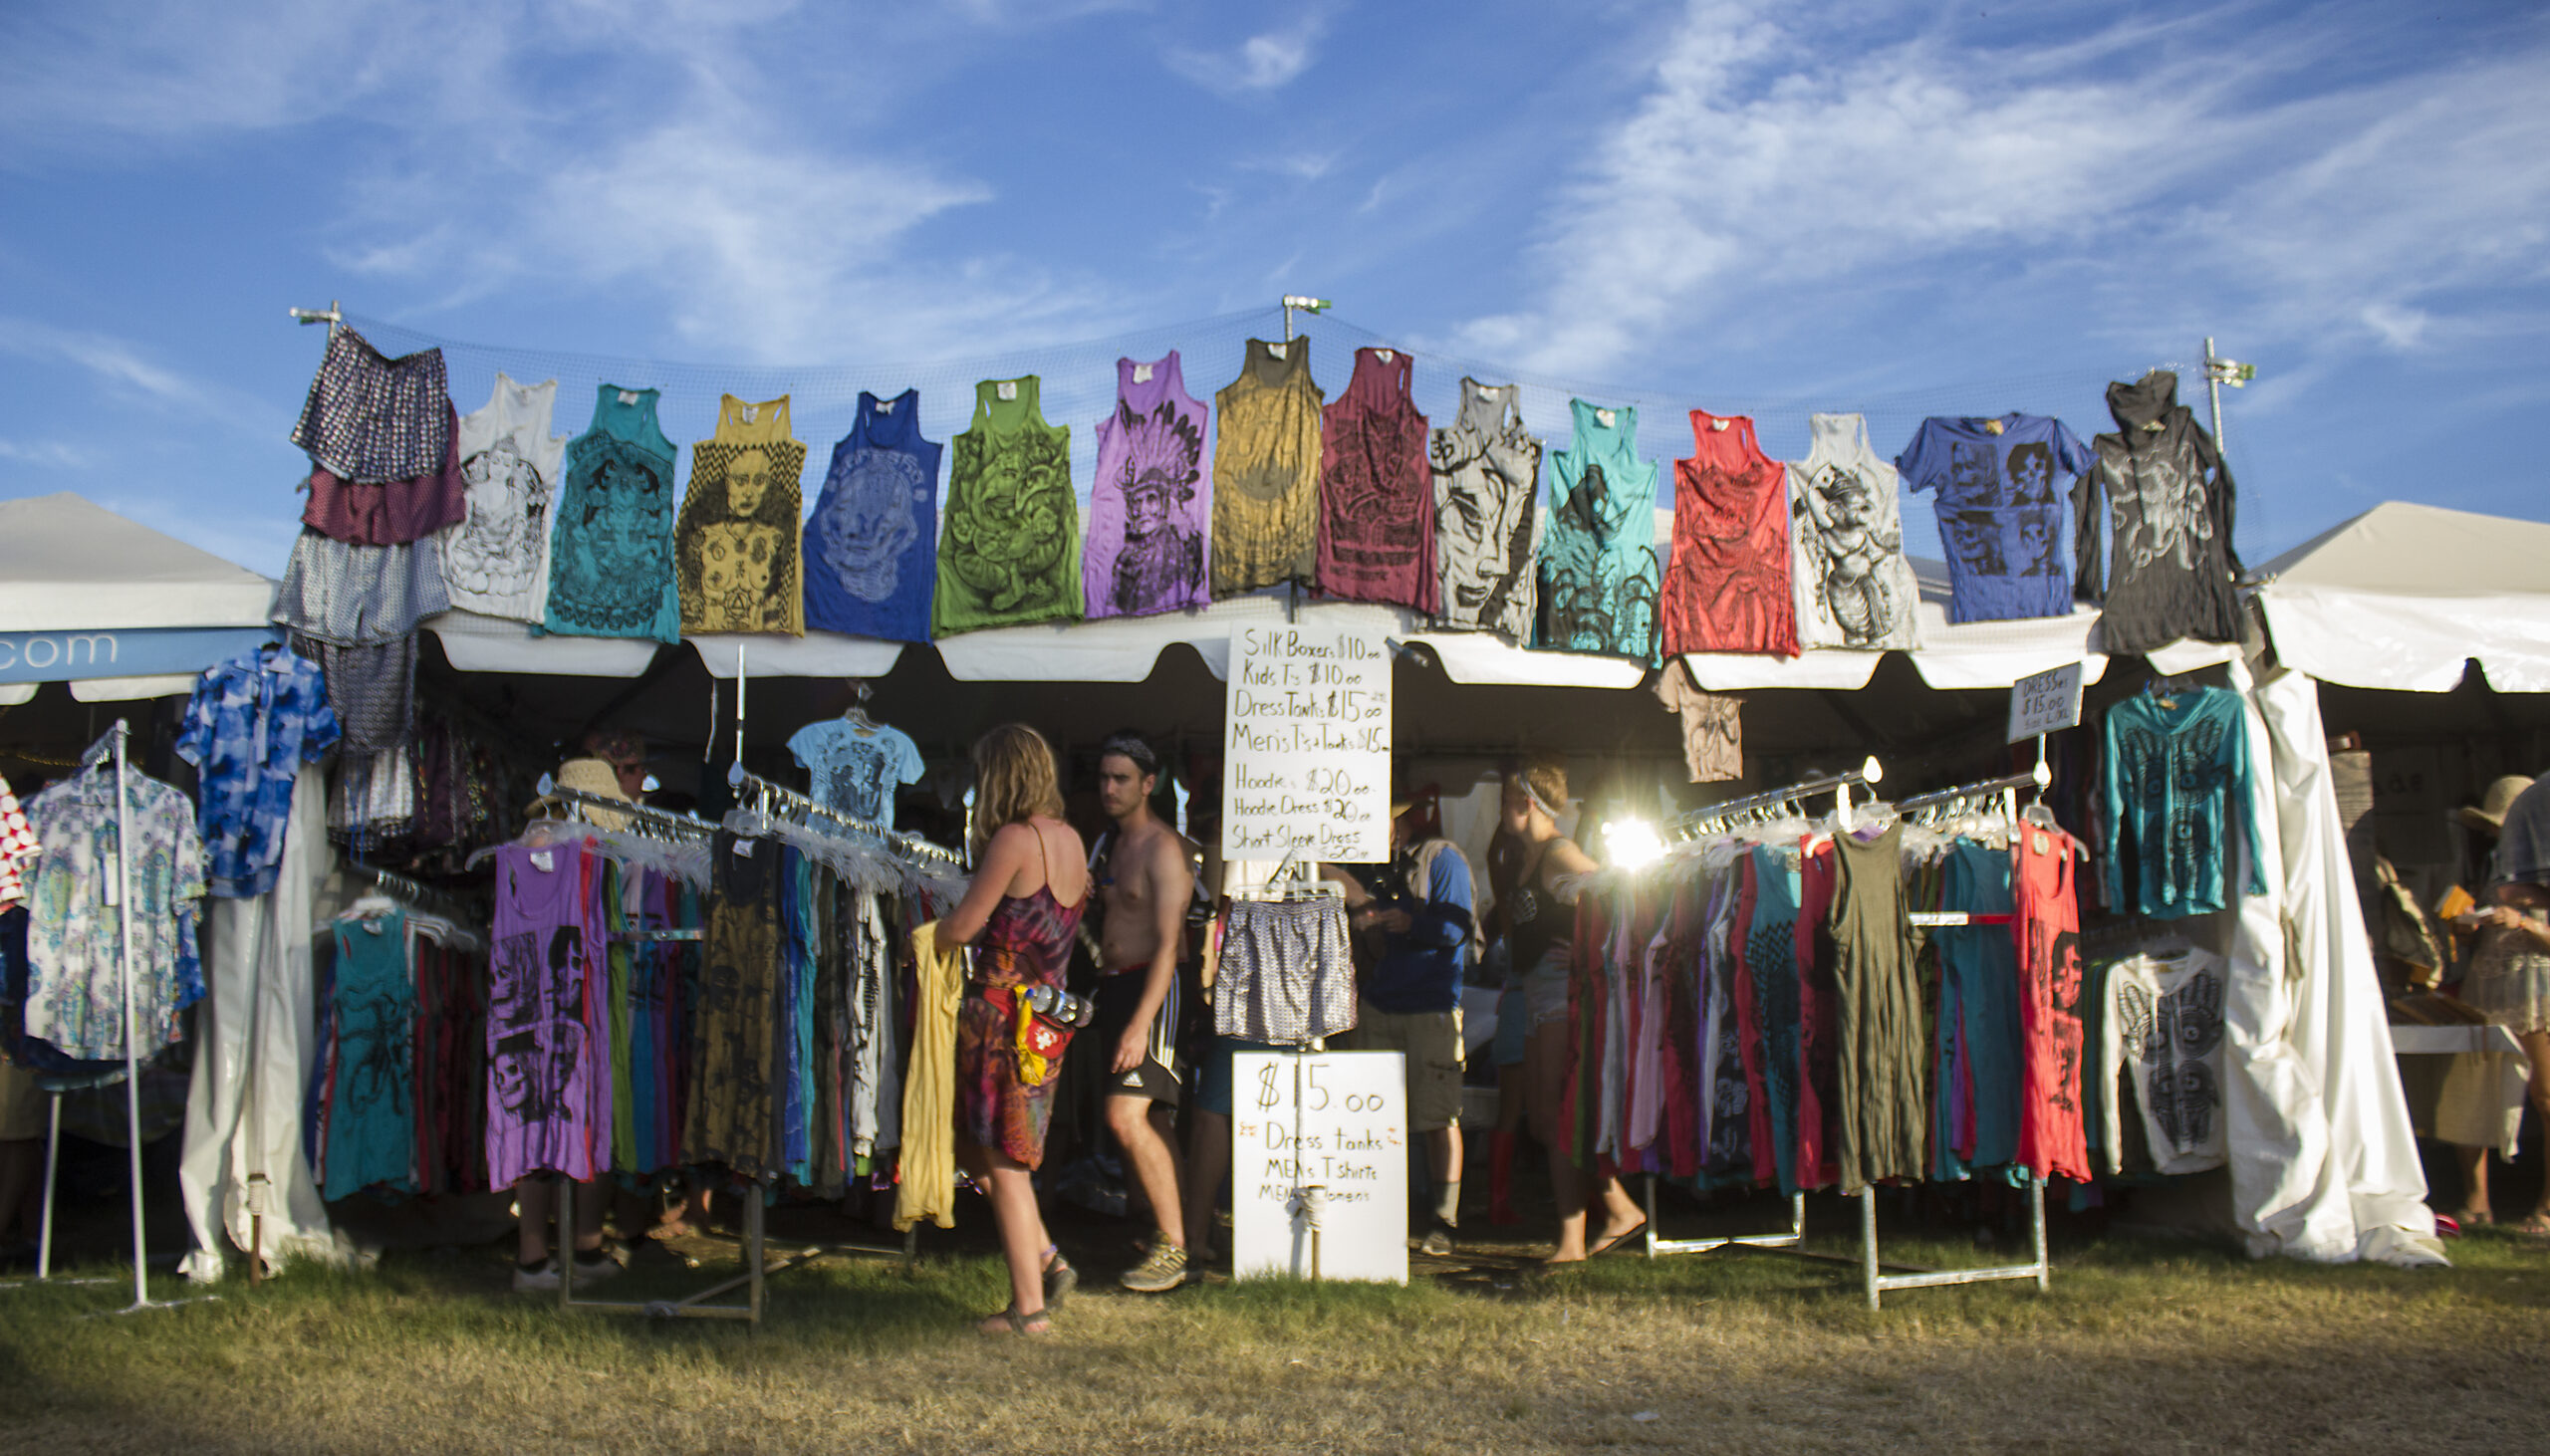 Merch and fashion at the Bonnaroo Music & Arts Festival in Manchester, Tennessee on 06/14/15. Photo by: Matthew McGuire.